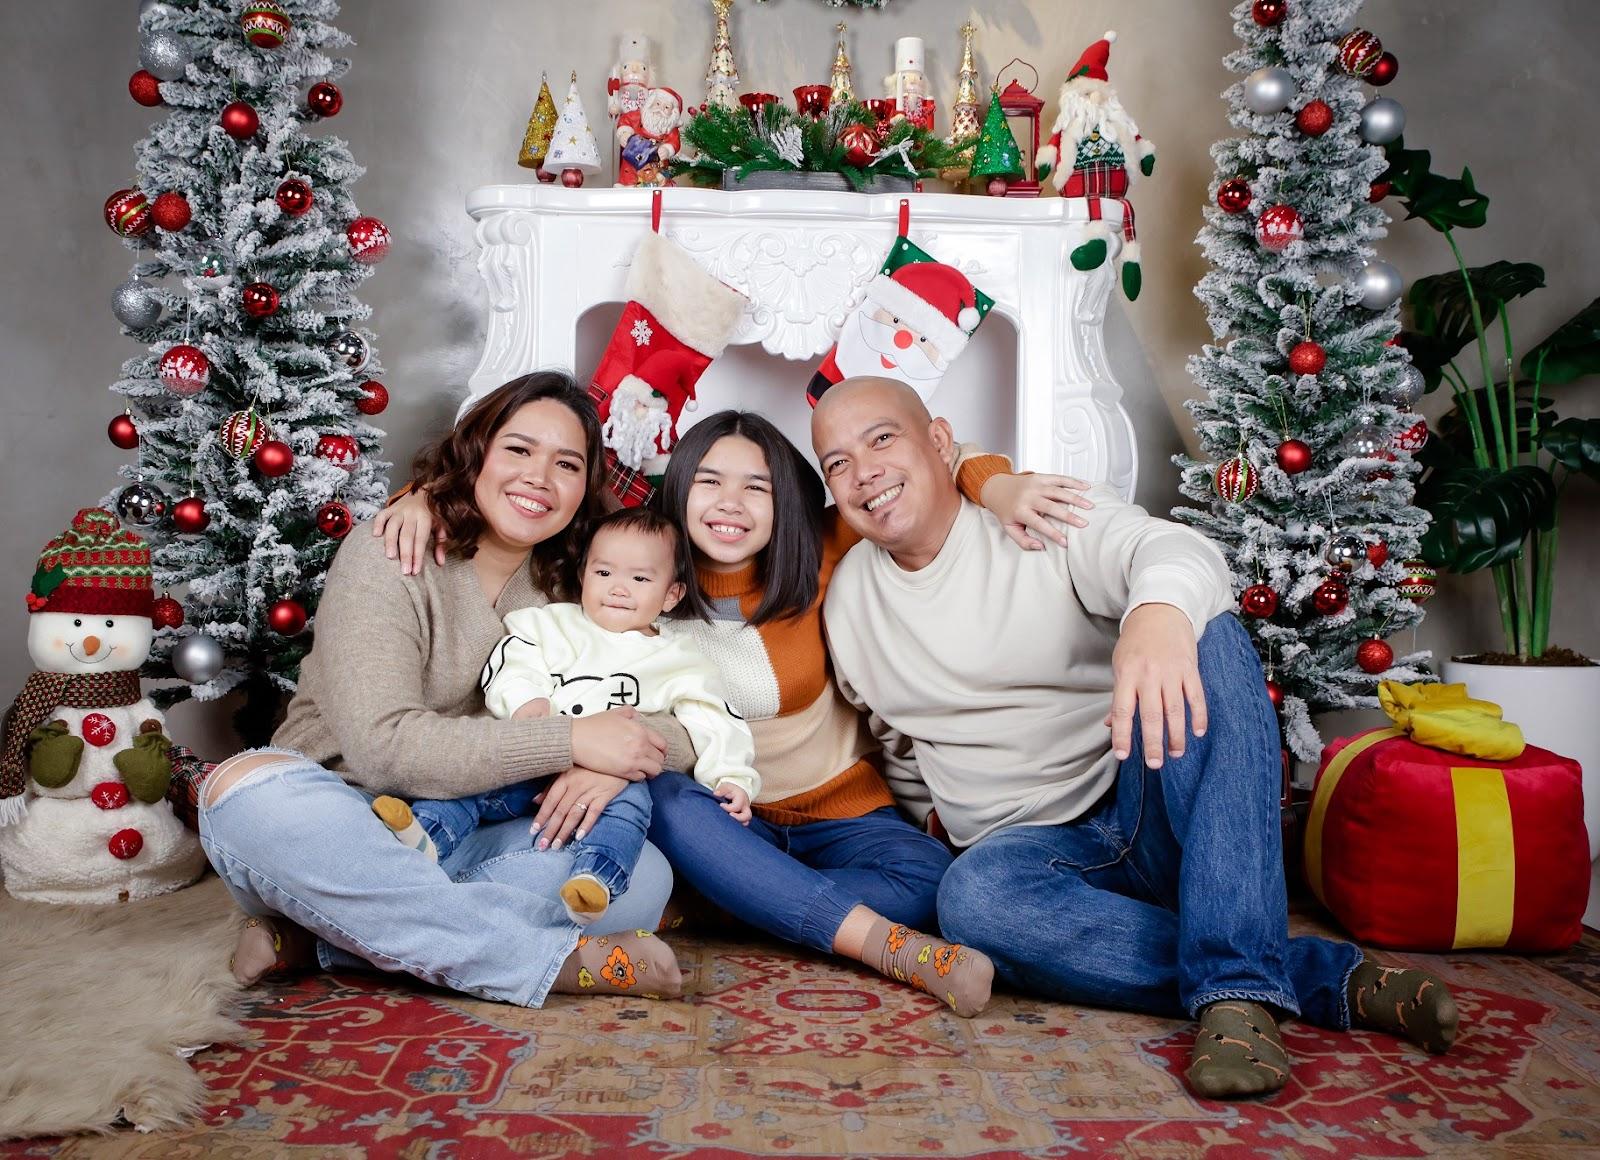 Family Christmas Photo Outfit Ideas: comfy sweaters with coordinating colors